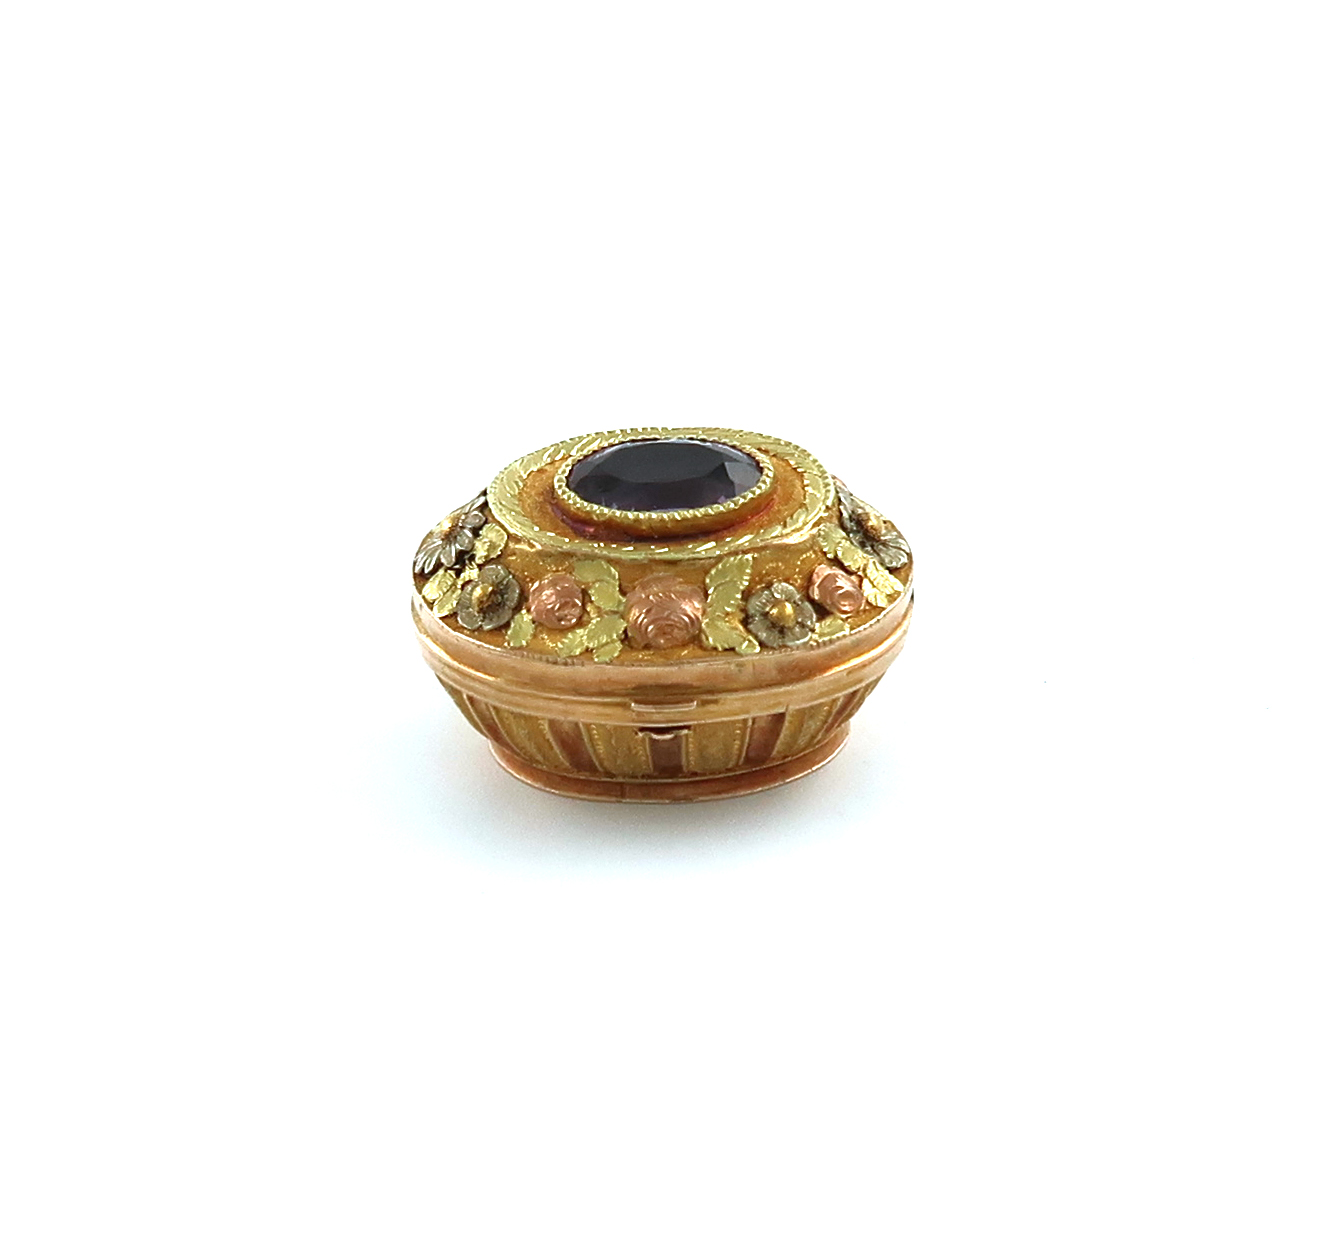 A 19th century French gold vinaigrette, marked with a French control mark, oval form, part-fluted